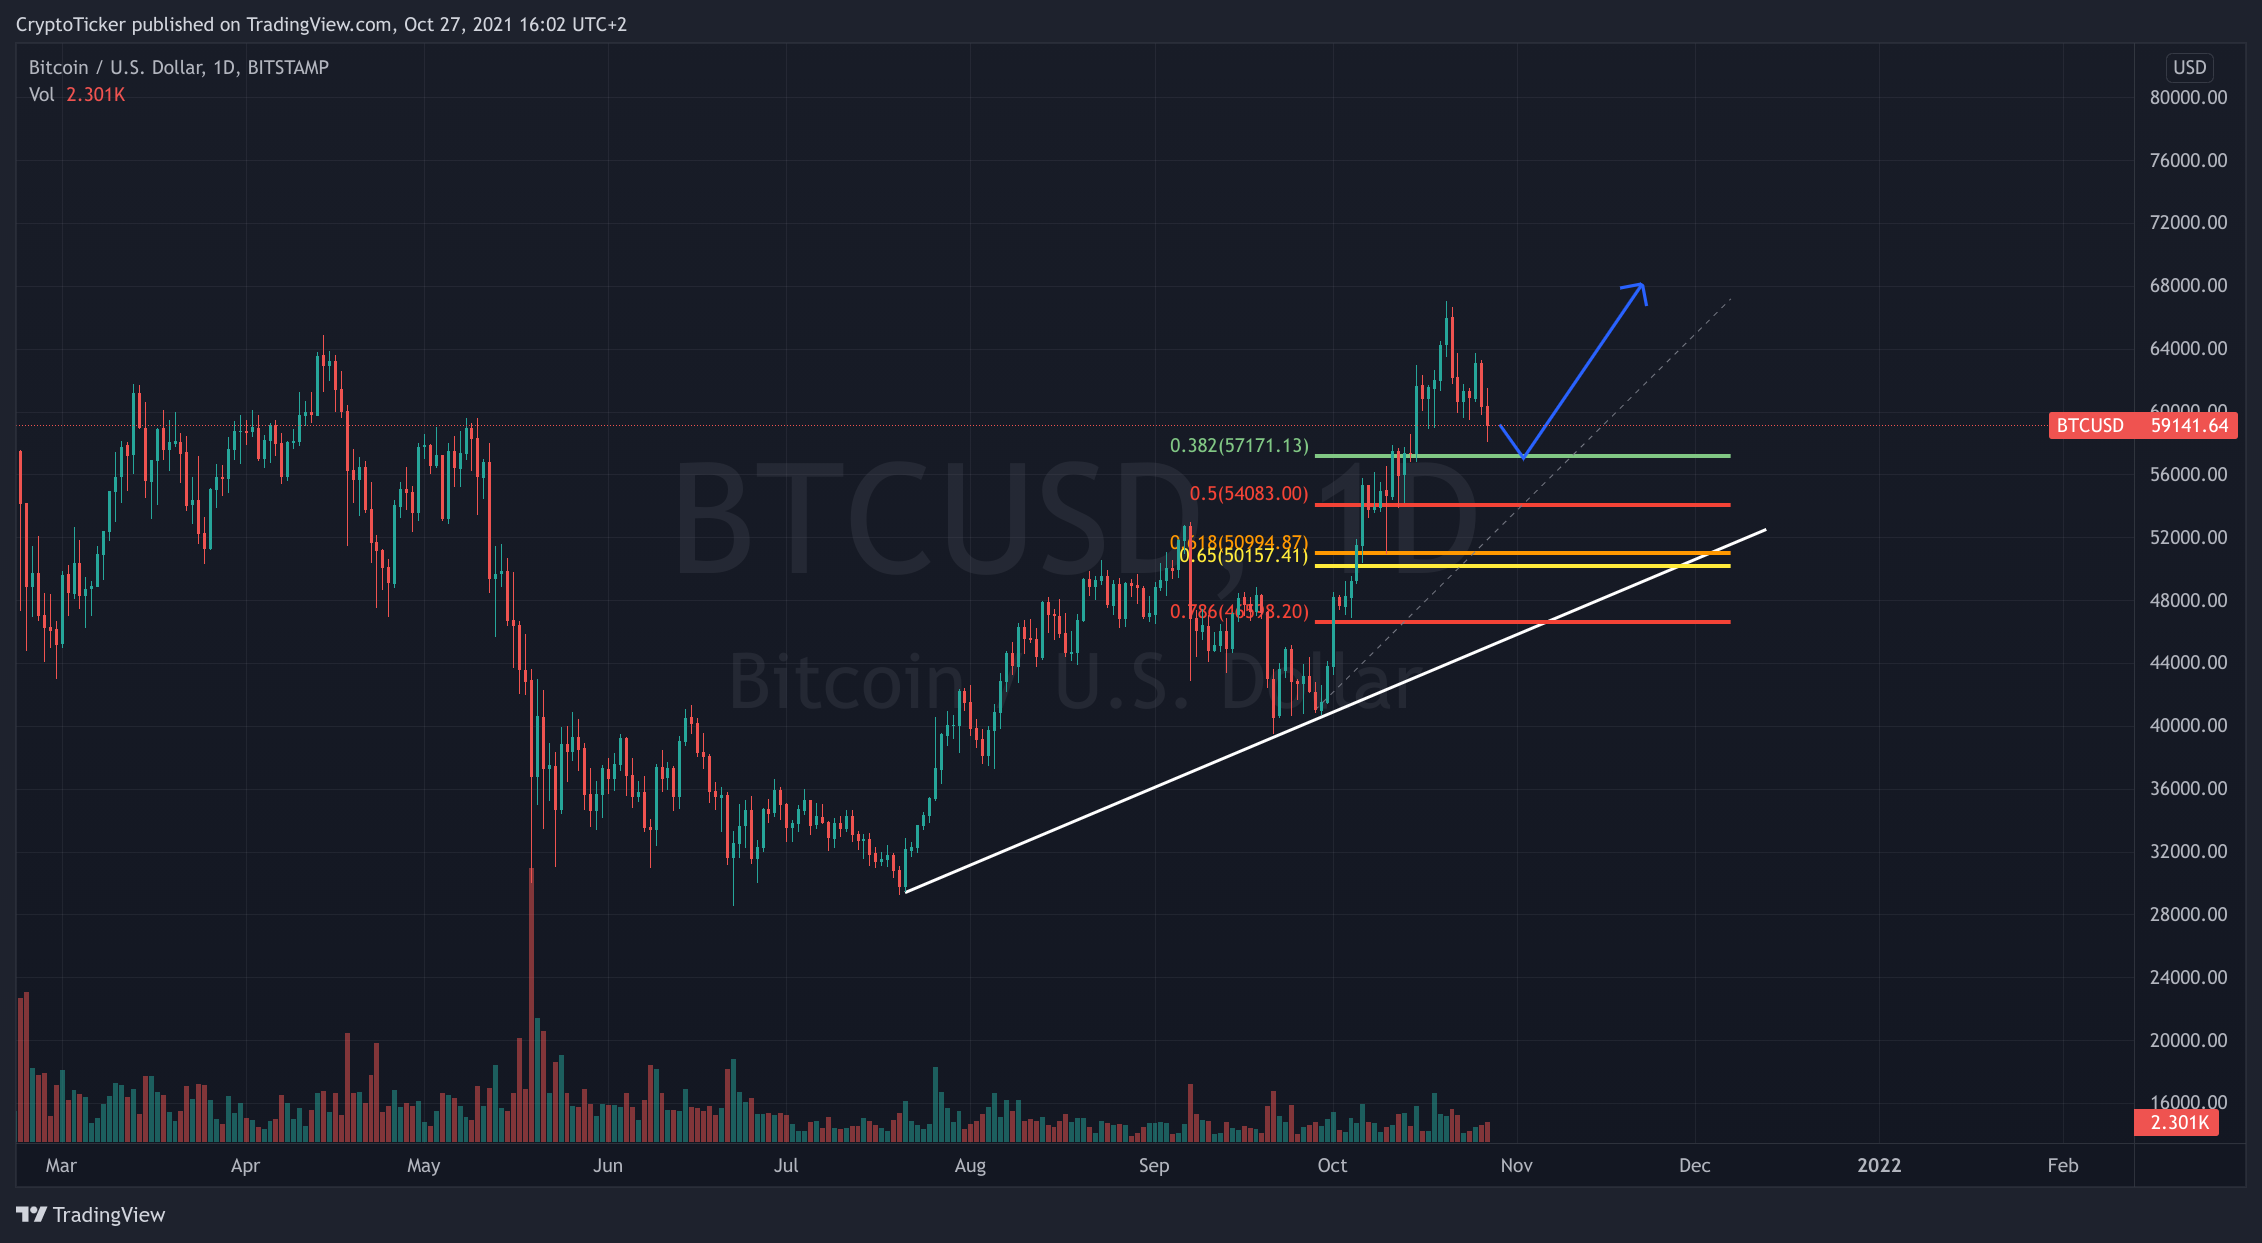 BTC/USD 1-day chart showing the macro outlook of Bitcoin